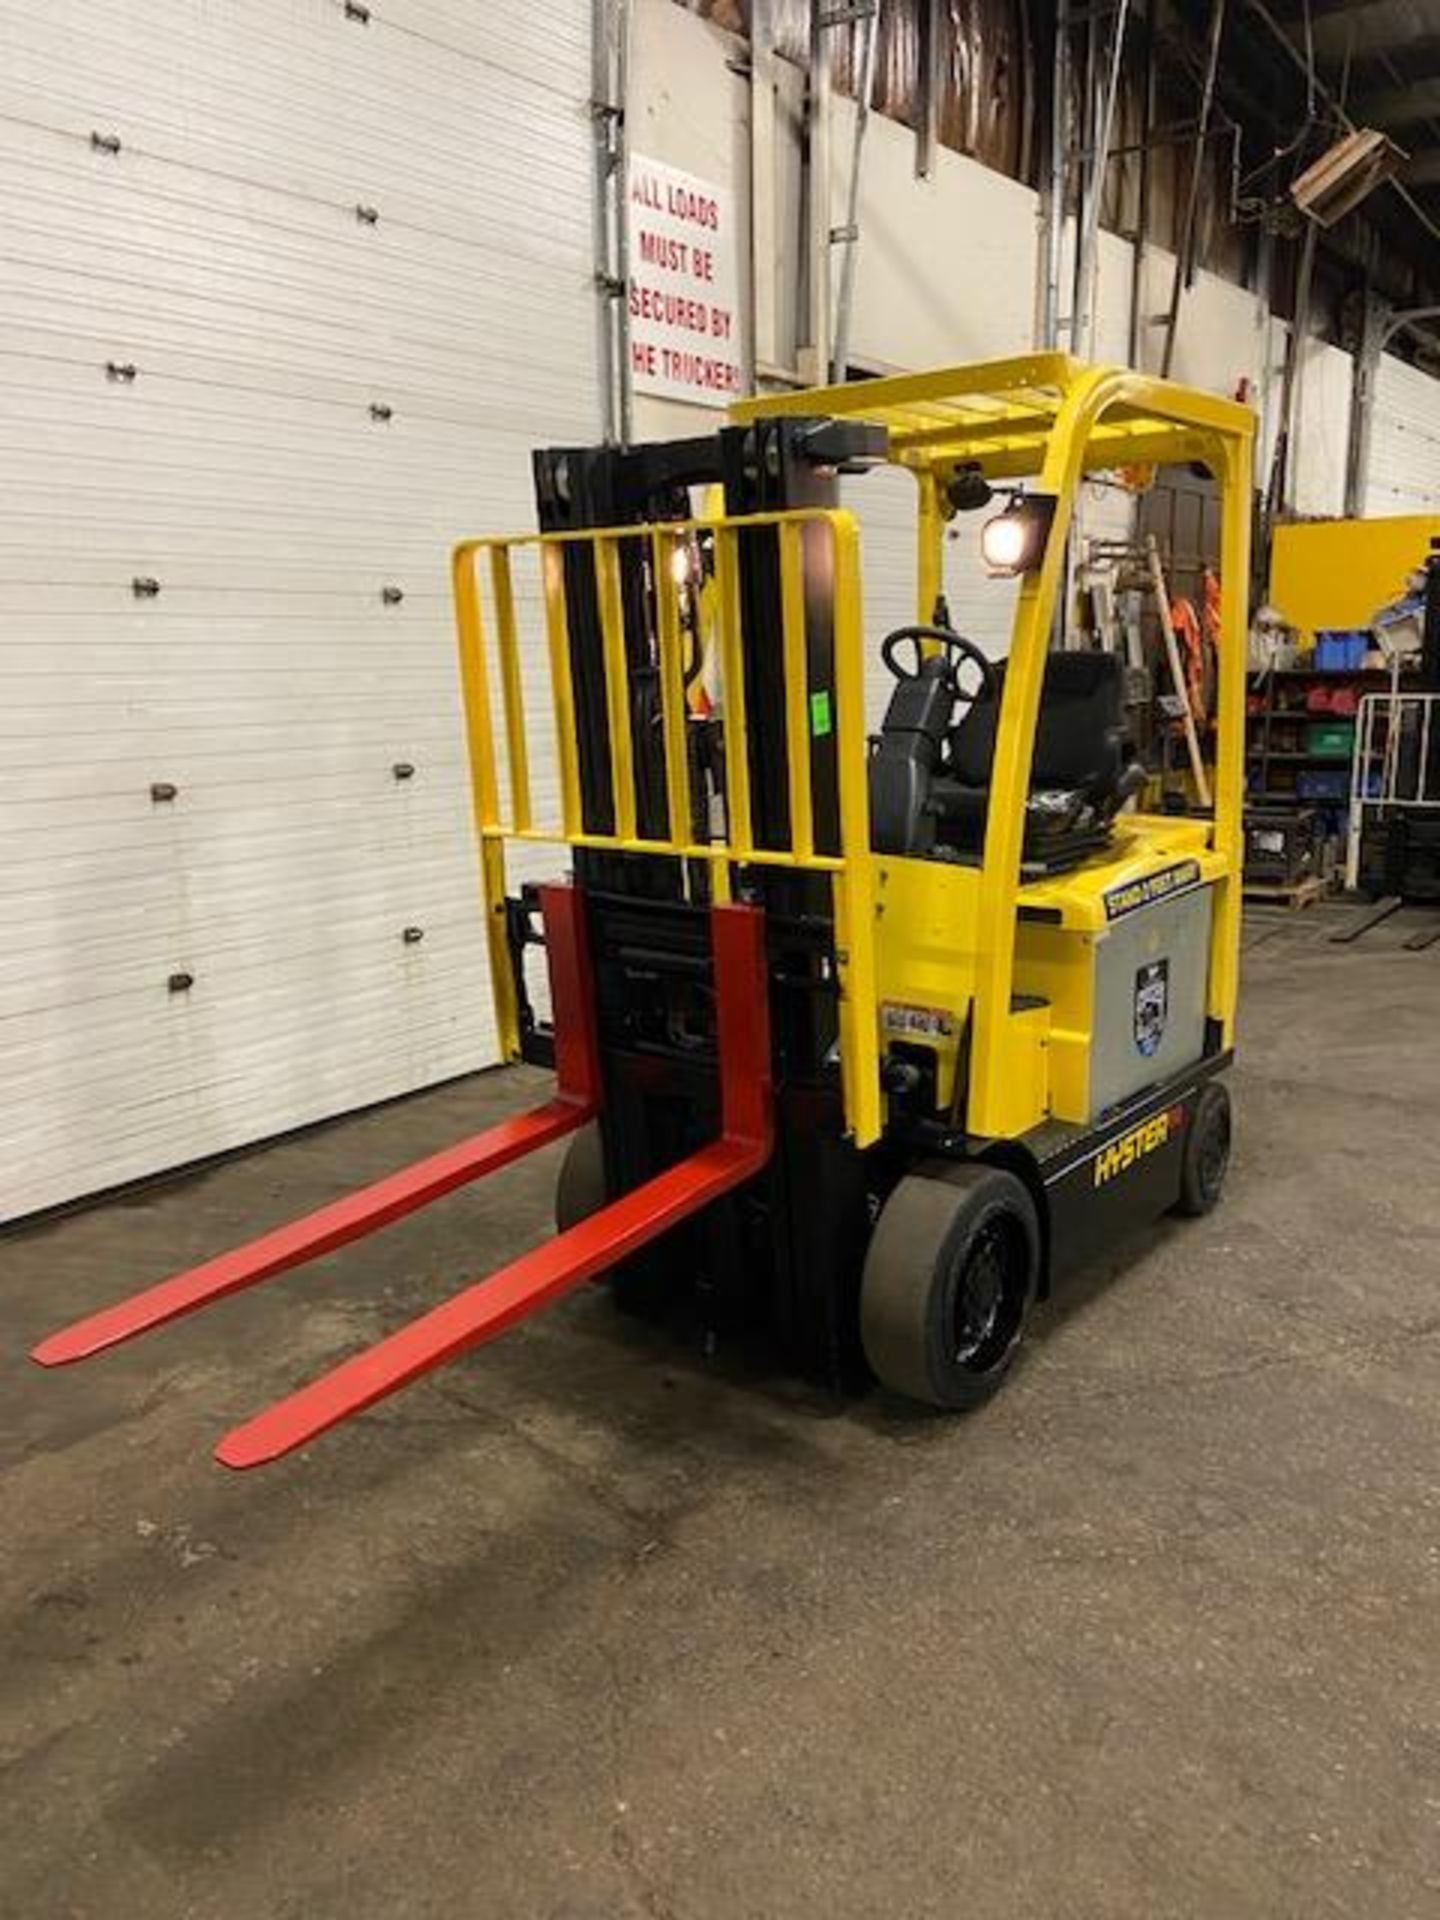 FREE CUSTOMS - 2013 Hyster 5000lbs Capacity Forklift Electric with 3-STAGE MAST sideshift MINT - Image 2 of 3